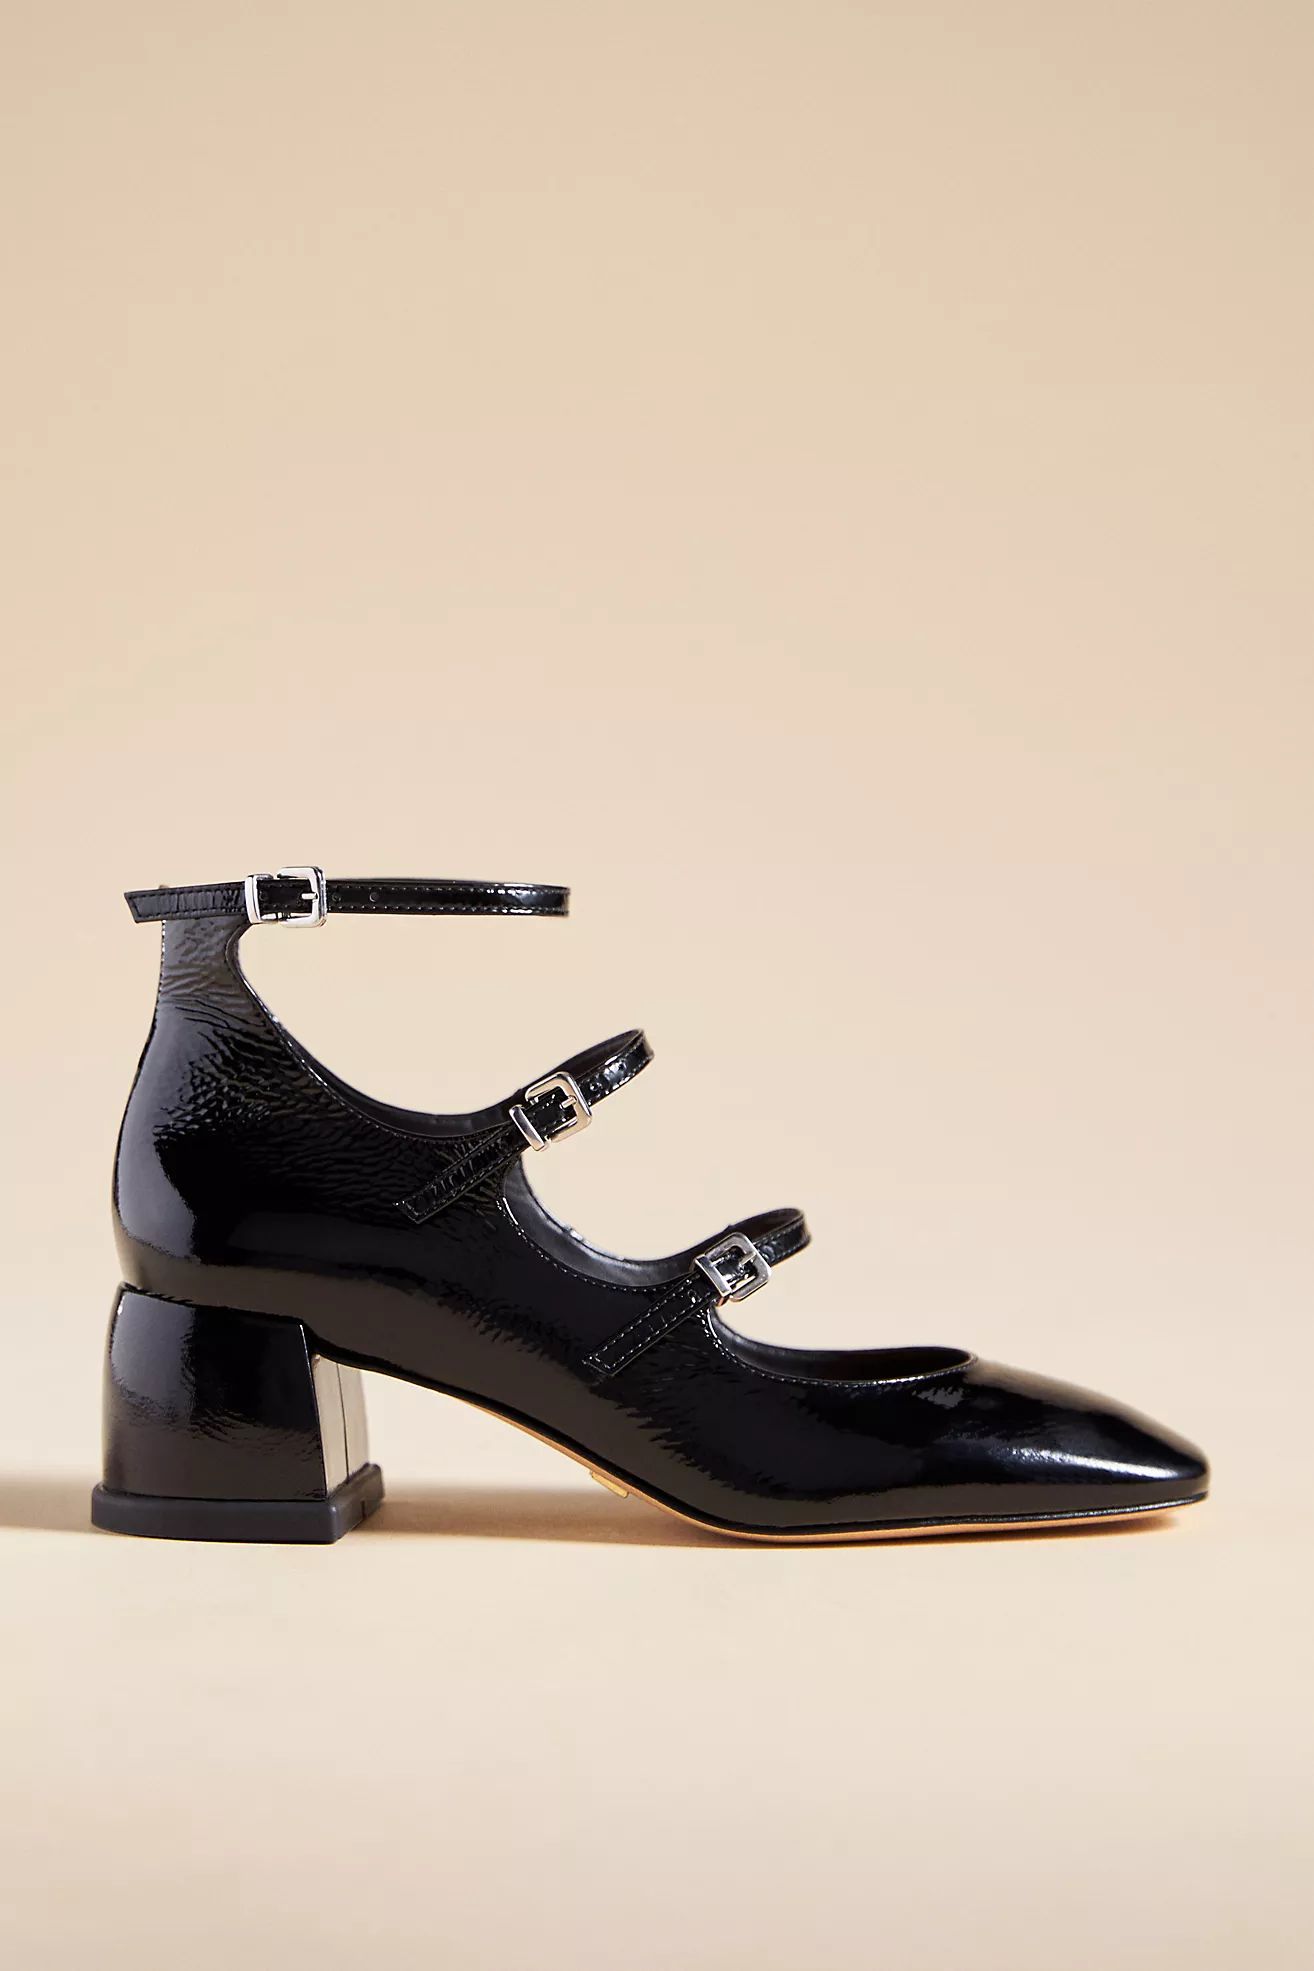 Vicenza Triple-Strap Leather Mary Jane Heels | Anthropologie (UK)